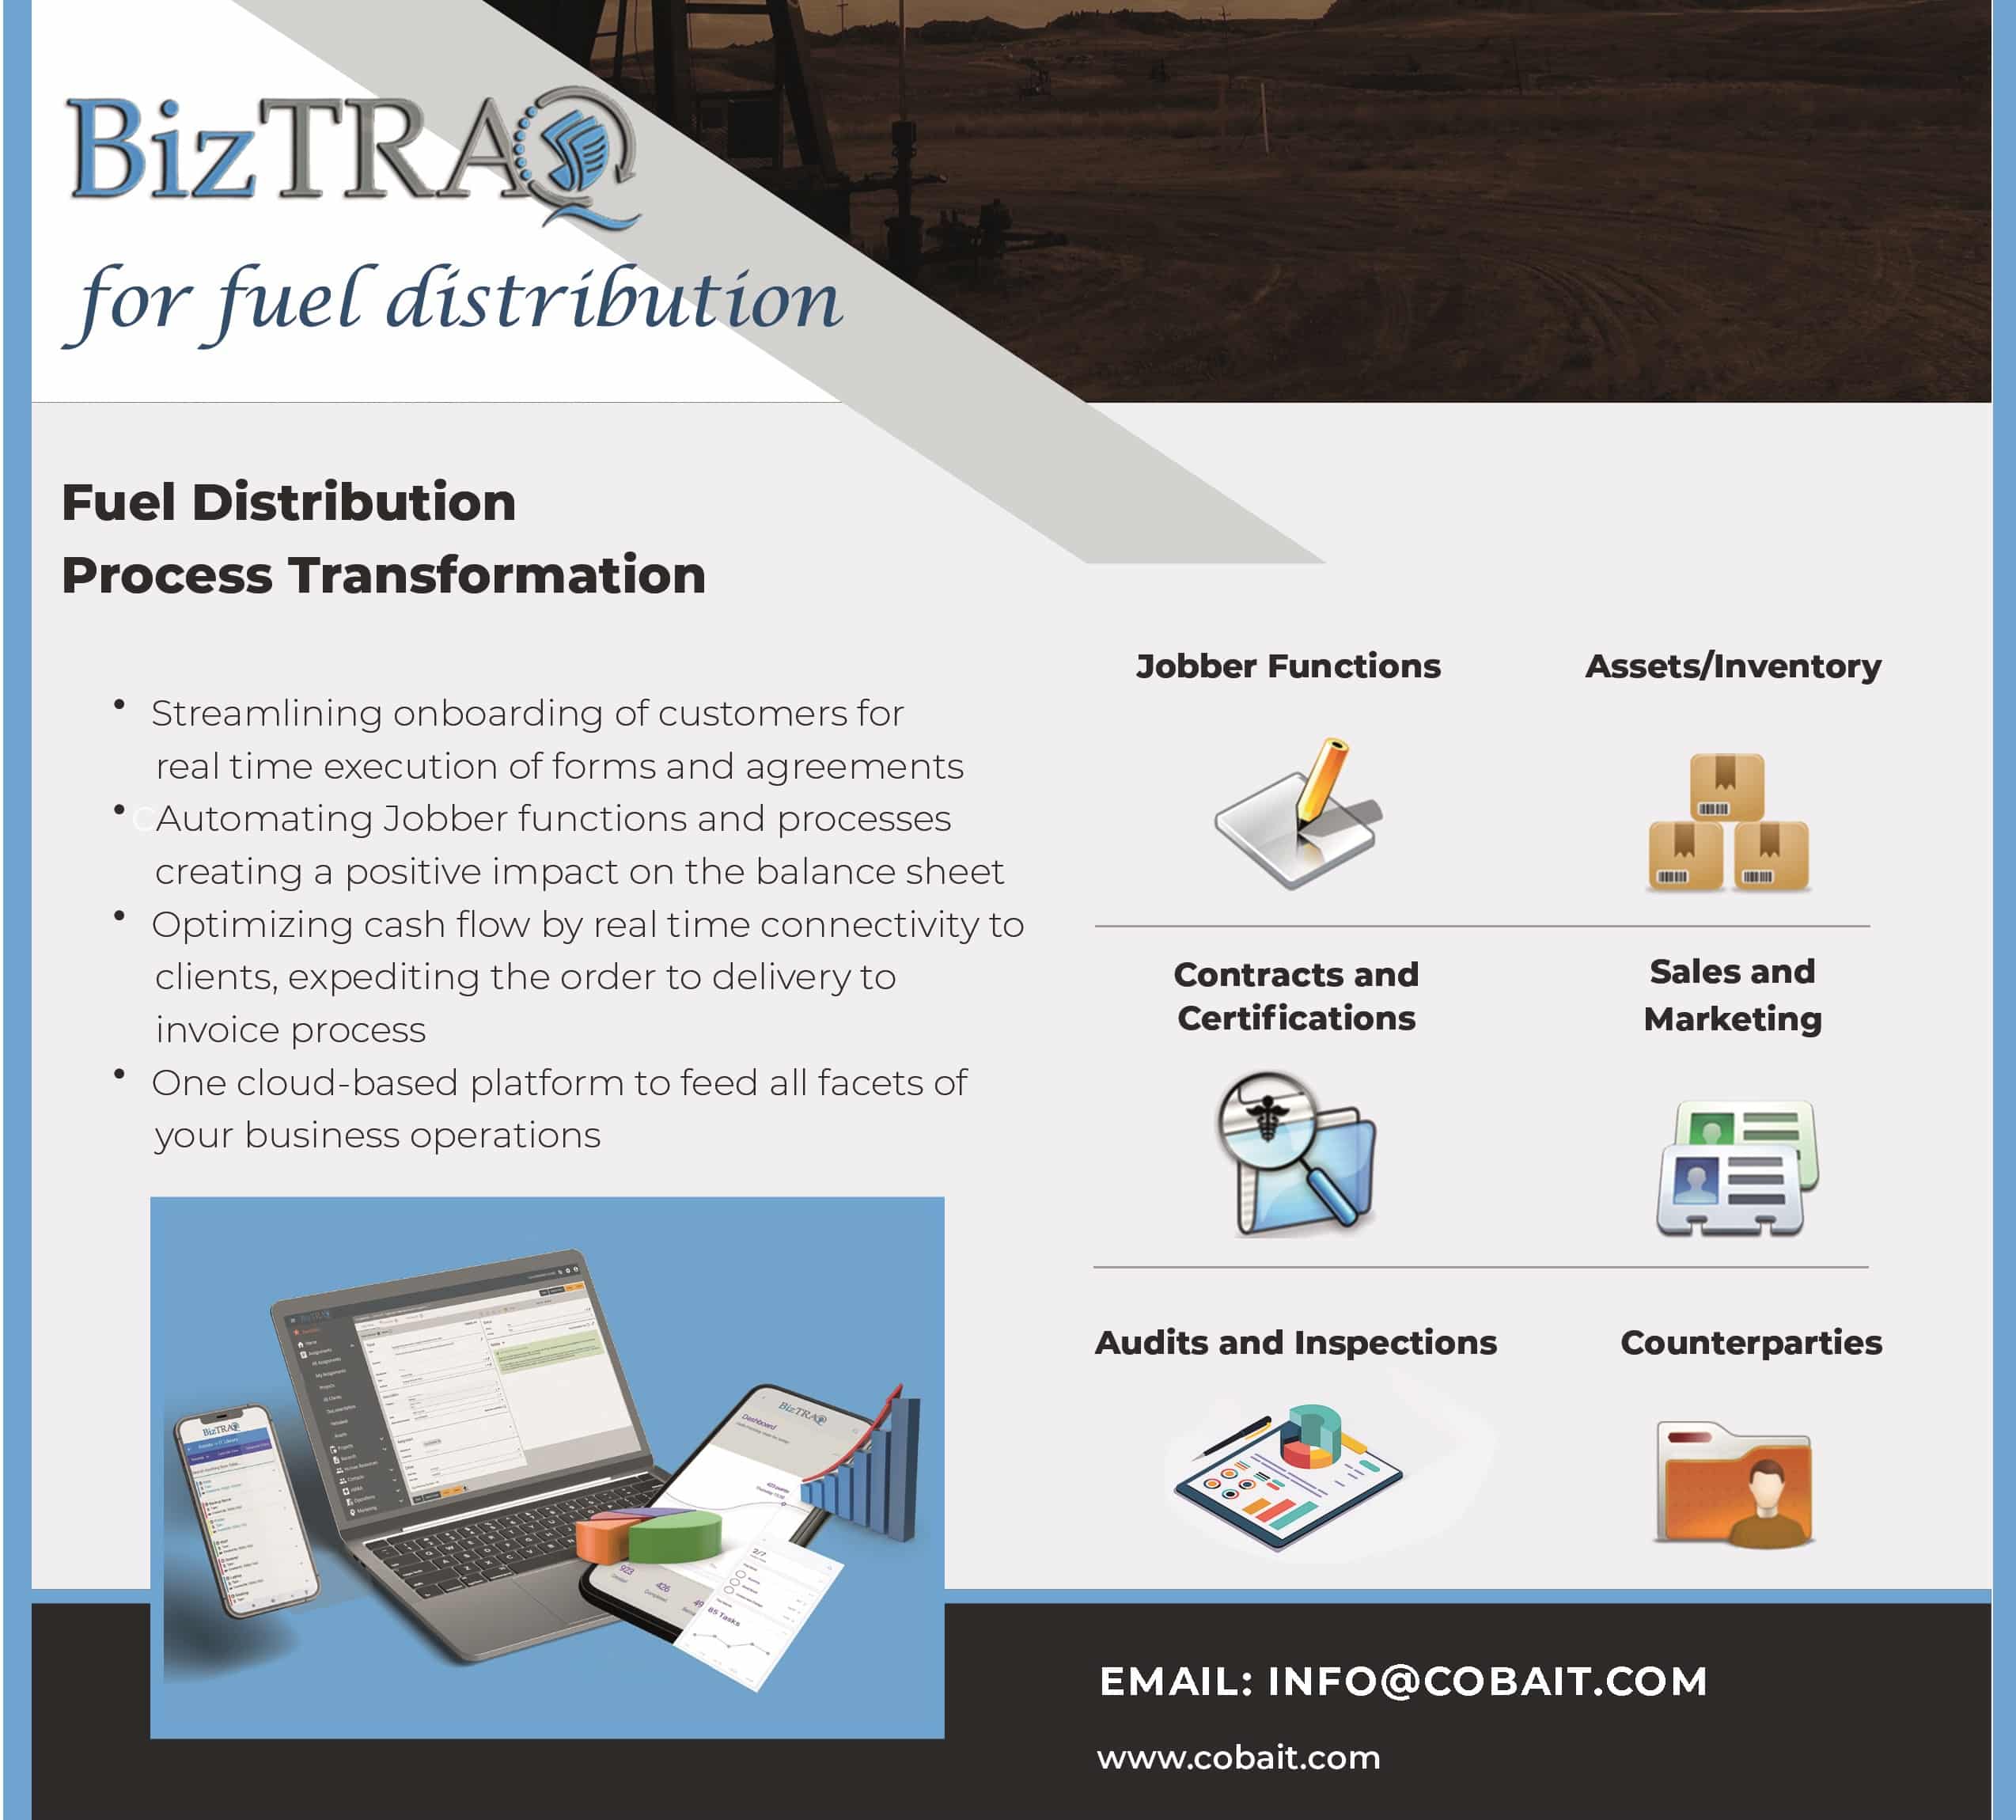 Energy sector IT support by BizTRAQ and COBAIT